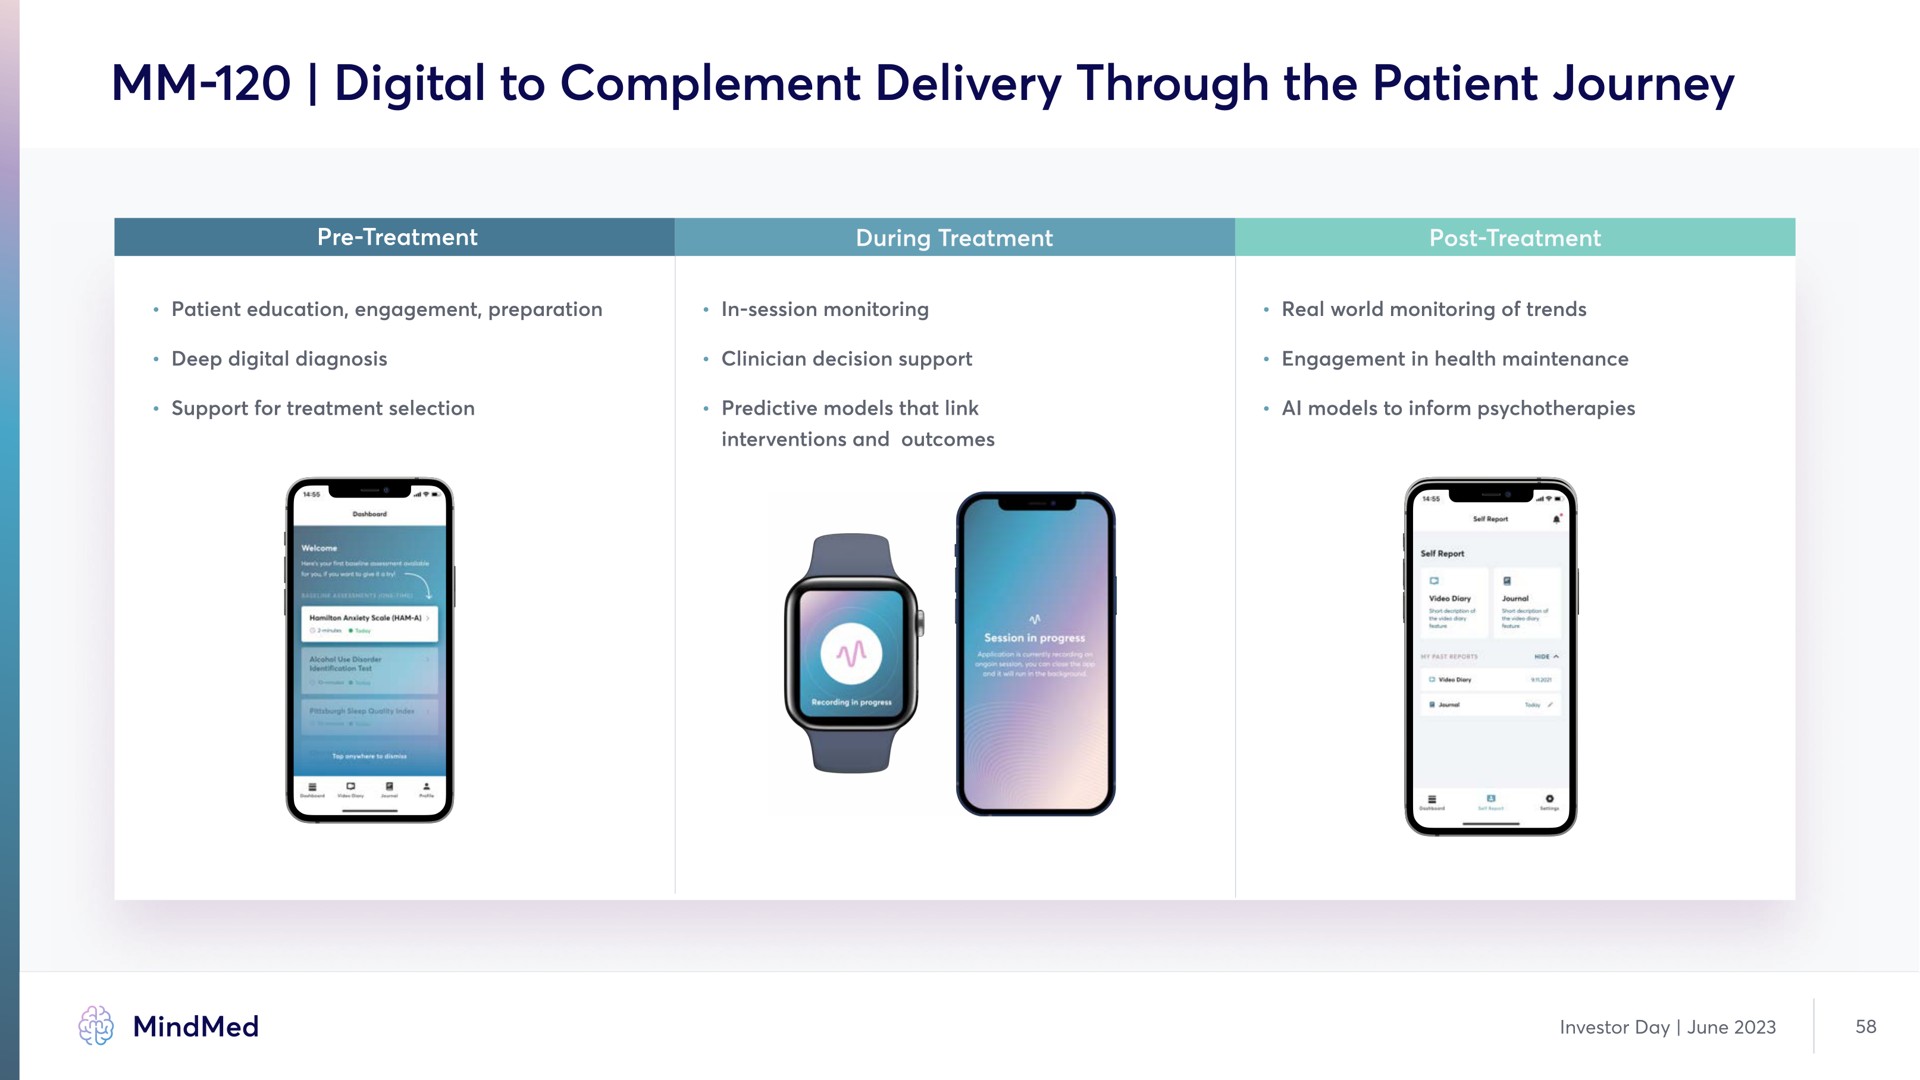 digital to complement delivery through the patient journey | MindMed